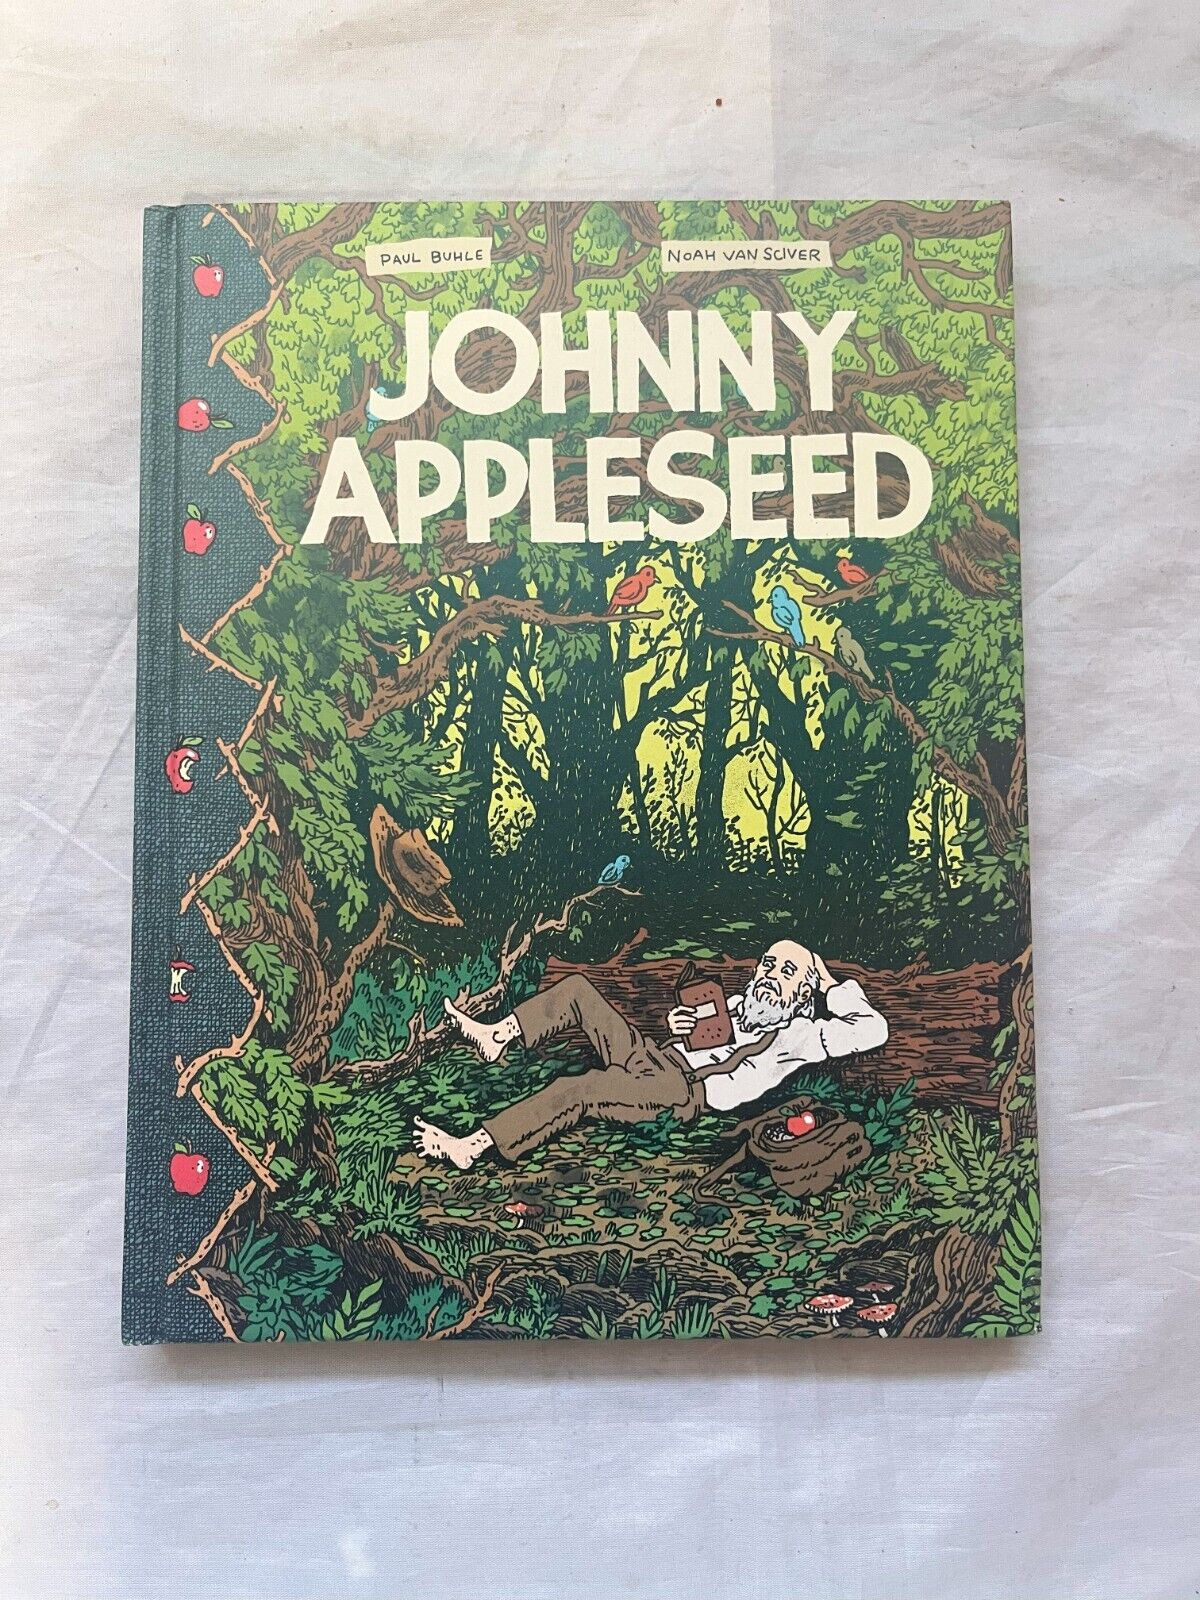 Johnny Appleseed by Paul Buhle, Noah Van Sciver Fantagraphics Books